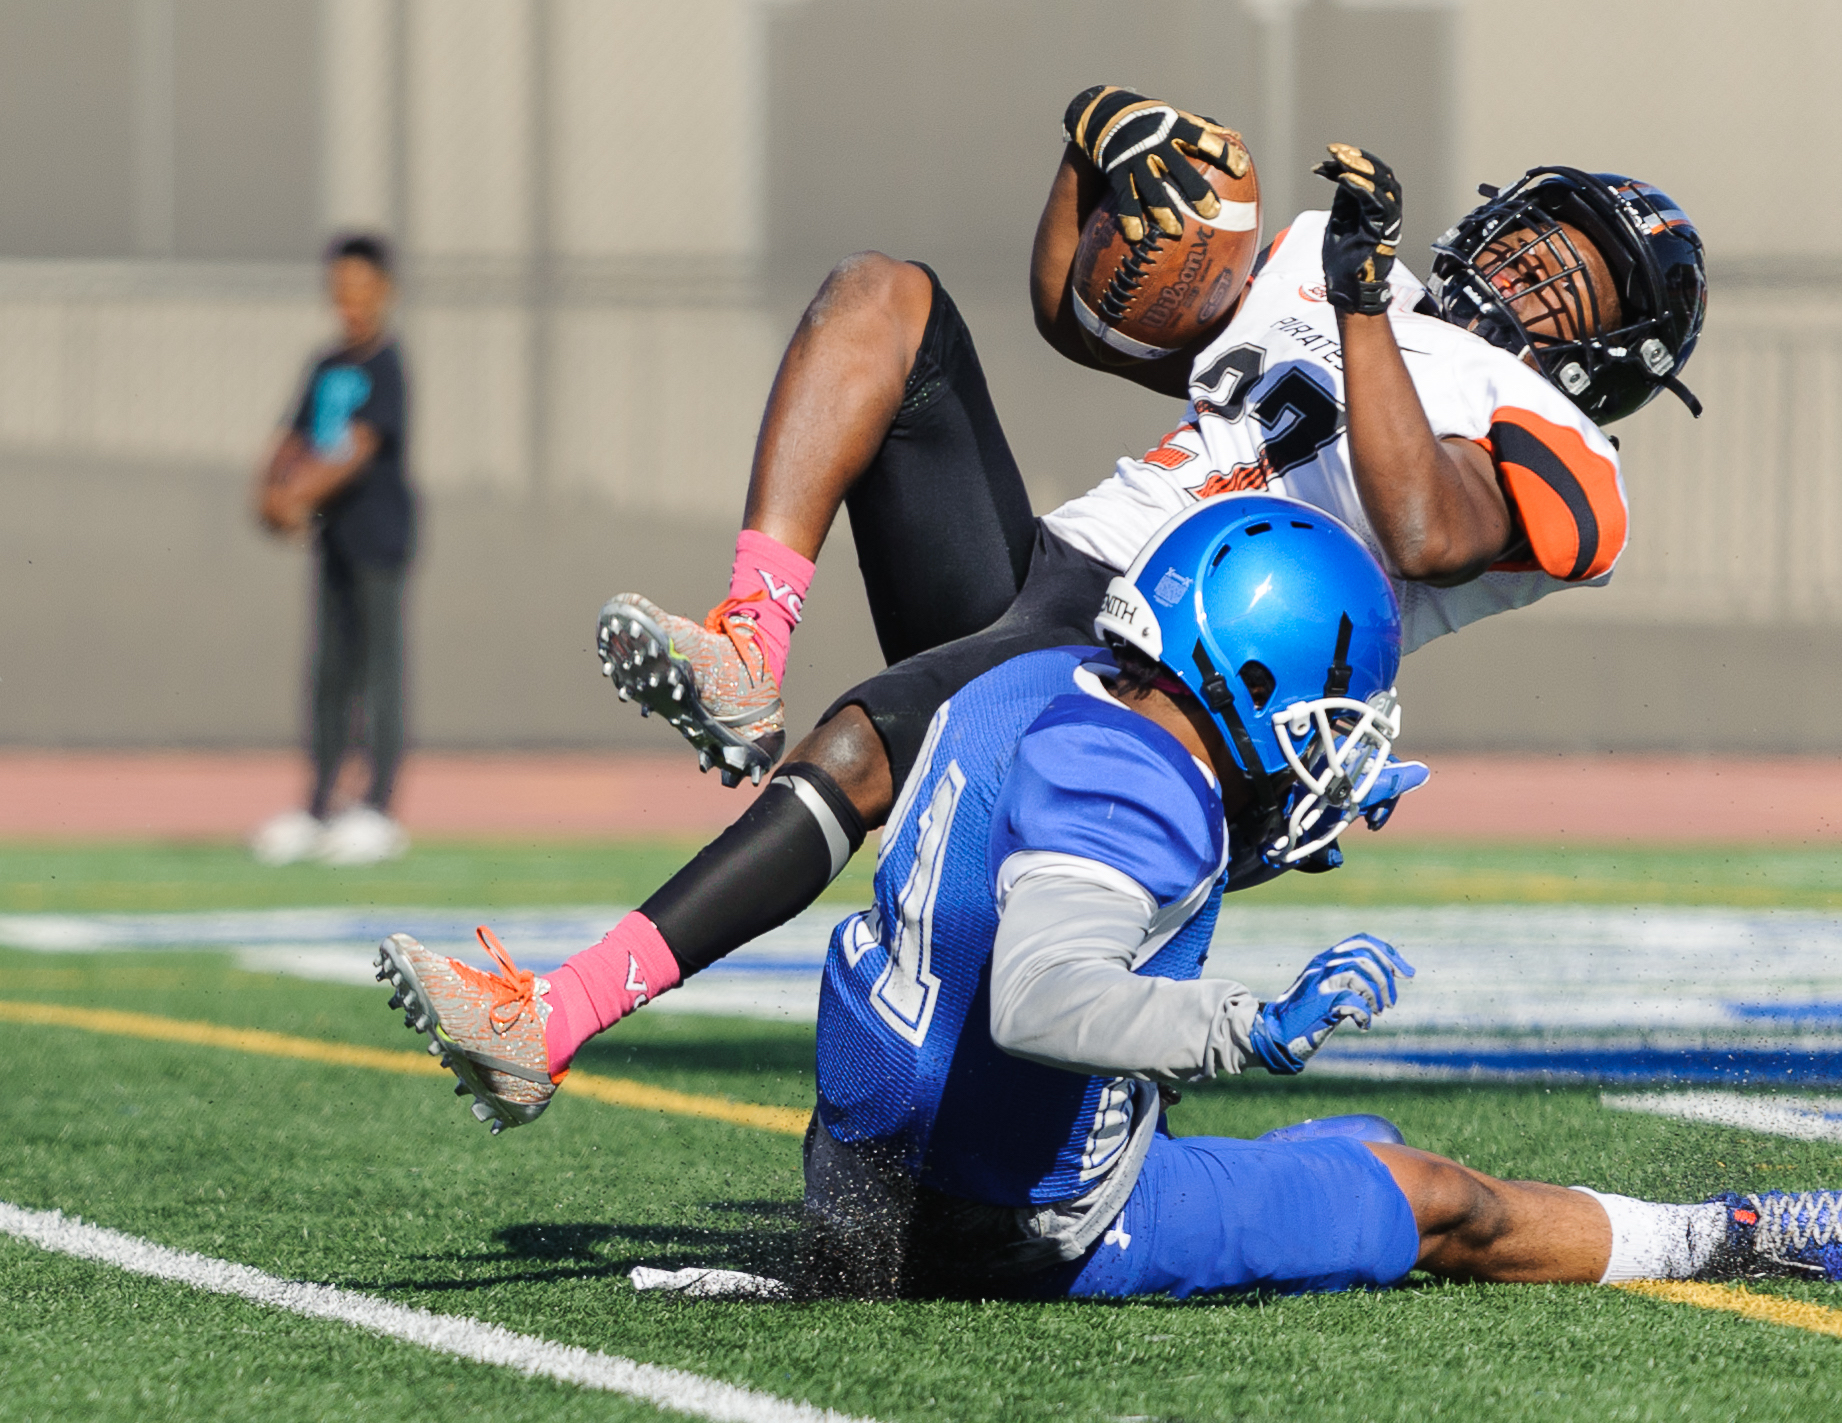  Wide receiver Aveon Irving (27) of Ventura College jumps into the endzone for a touchdown despite being tackled by Skye Germaine (21) of Santa Monica College. The touchdown was later waived off as there was a flag during the play. The Santa Monica C